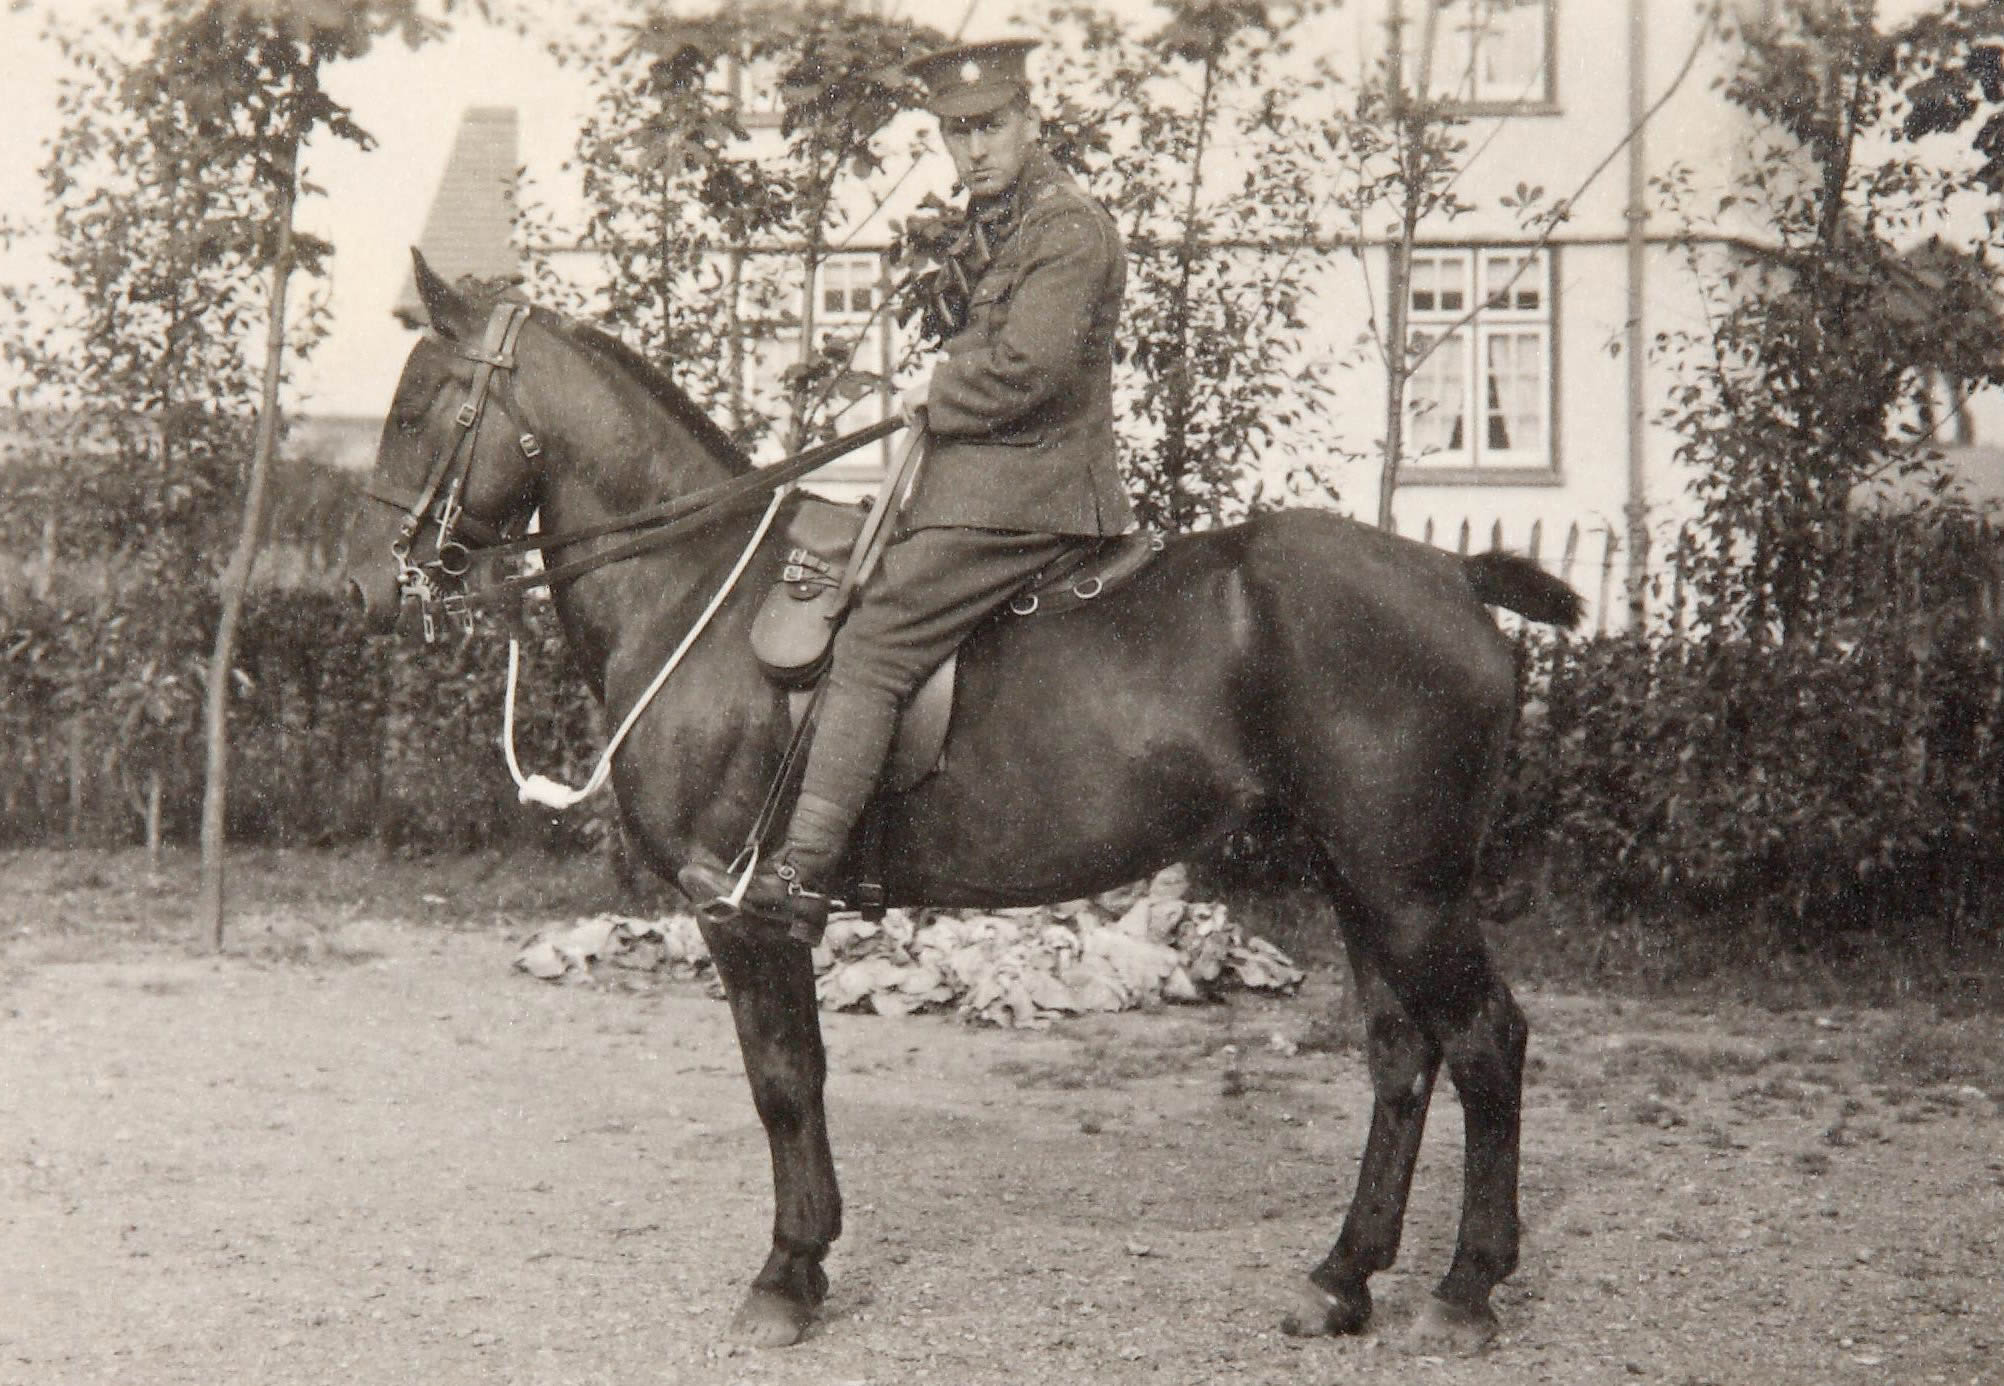 Image of a soldier on a horse